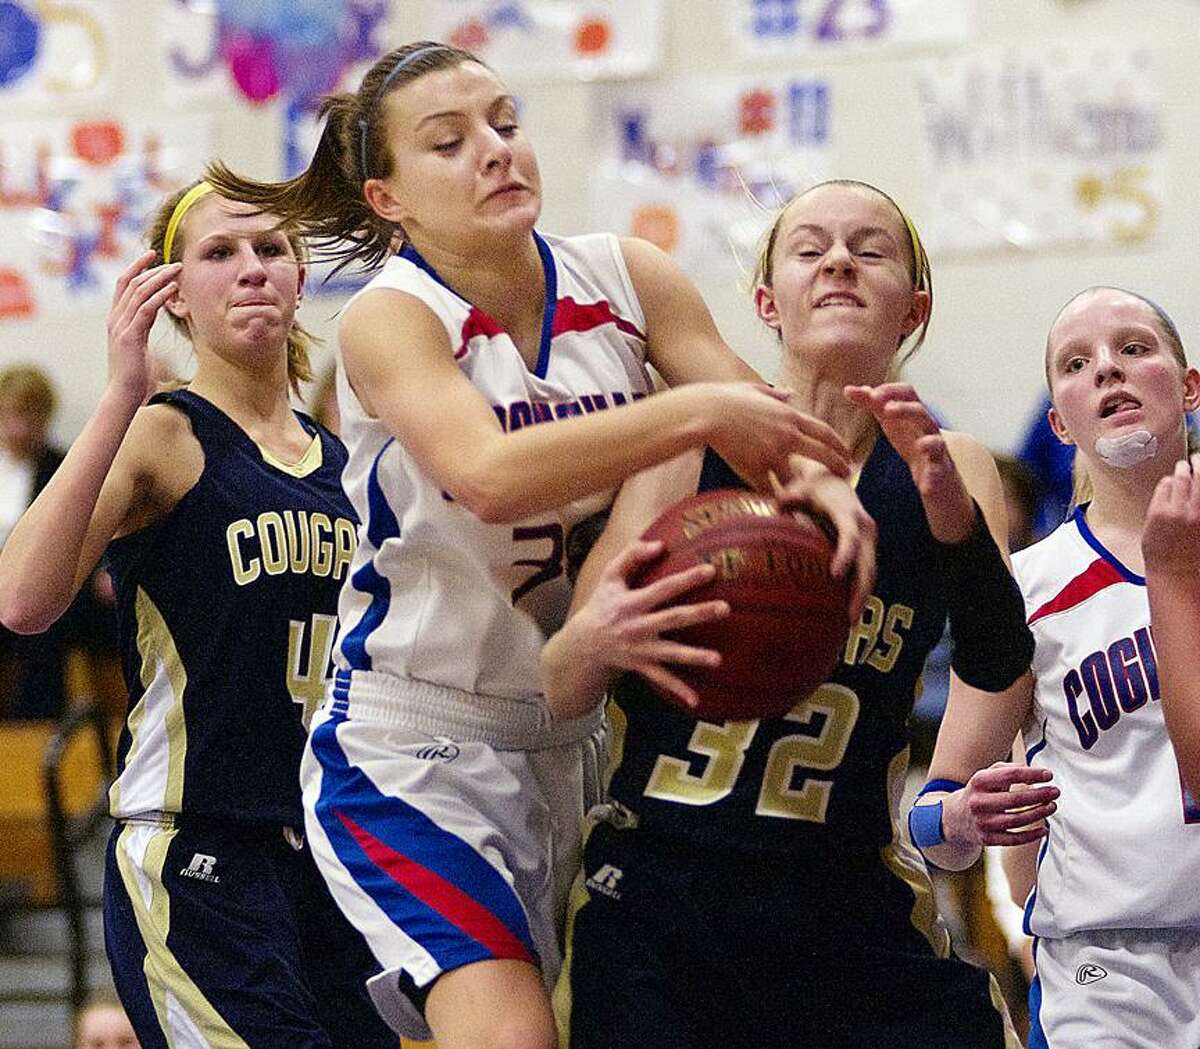 Catherine Avalone/The Middletown Press Coginchaug senior Jessica Solomon battles H-K sophomore Halie Serbent for a rebound. At left is Kiley Anderson (4) and junior forwardMorgan Kuehnle at right. The H-K Cougars came from behind to defeat the Coginchaug Blue Devils 43-39.